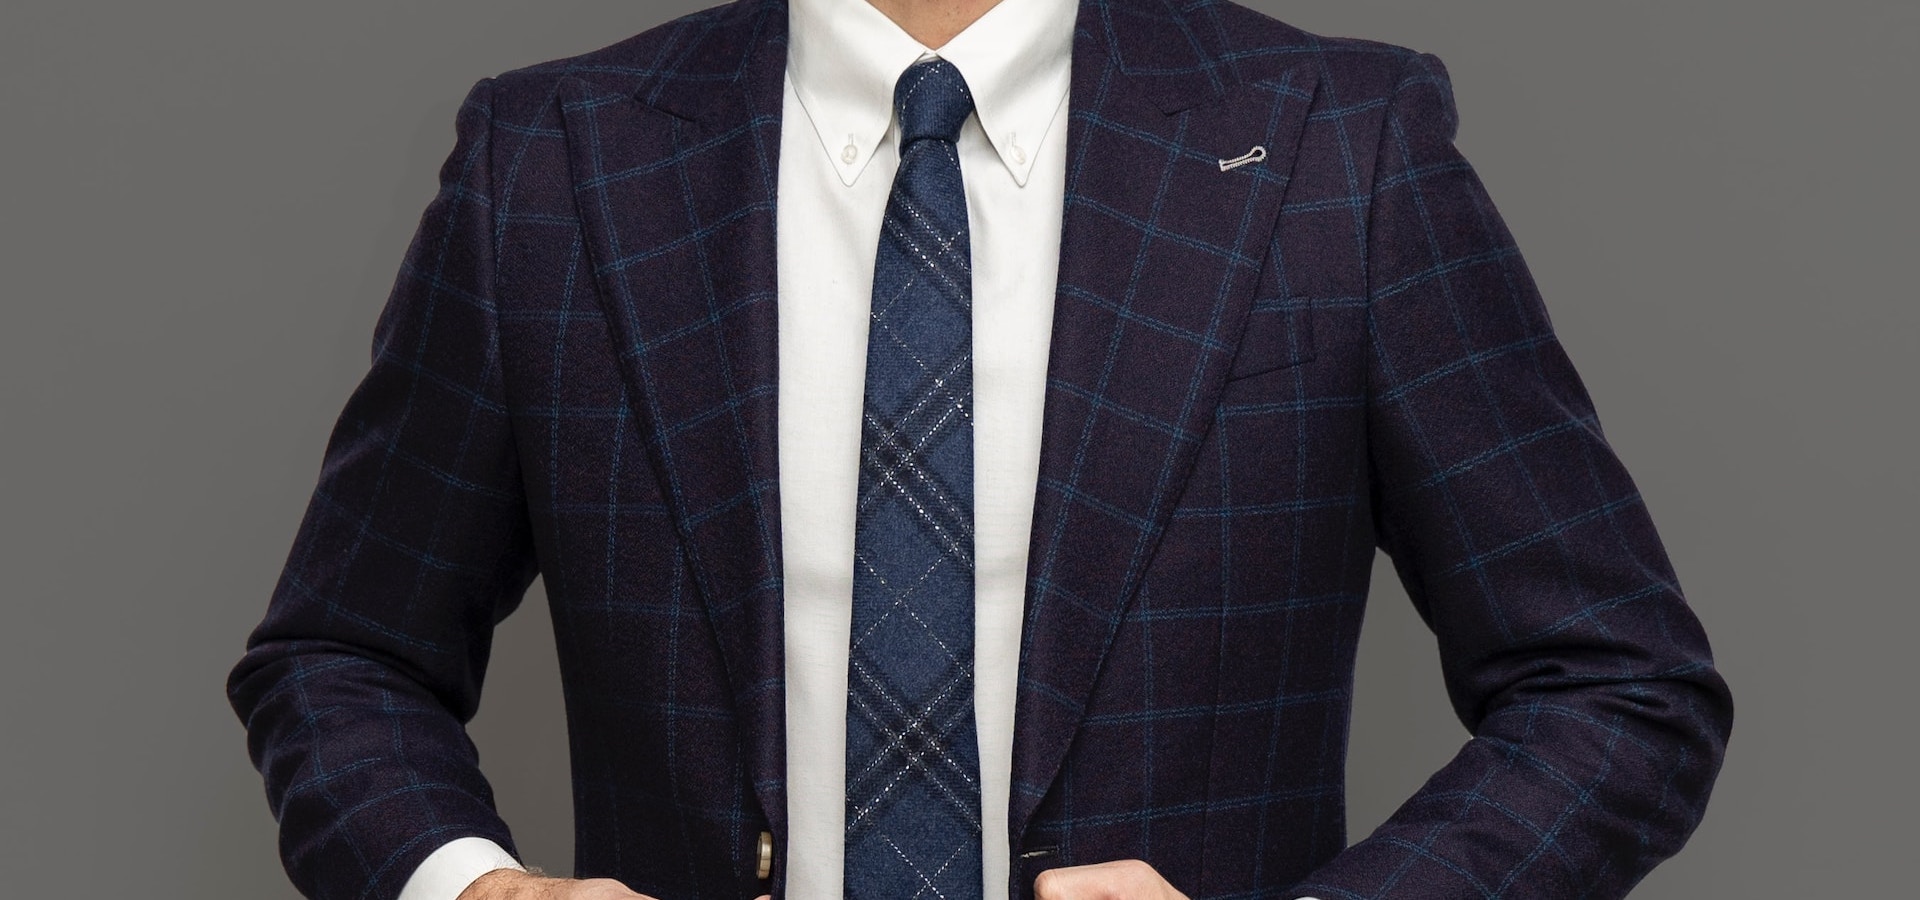 Custom-Tailored Suits in Houston by Tailors Bangkok – Visiting Tailor Trunk Shows